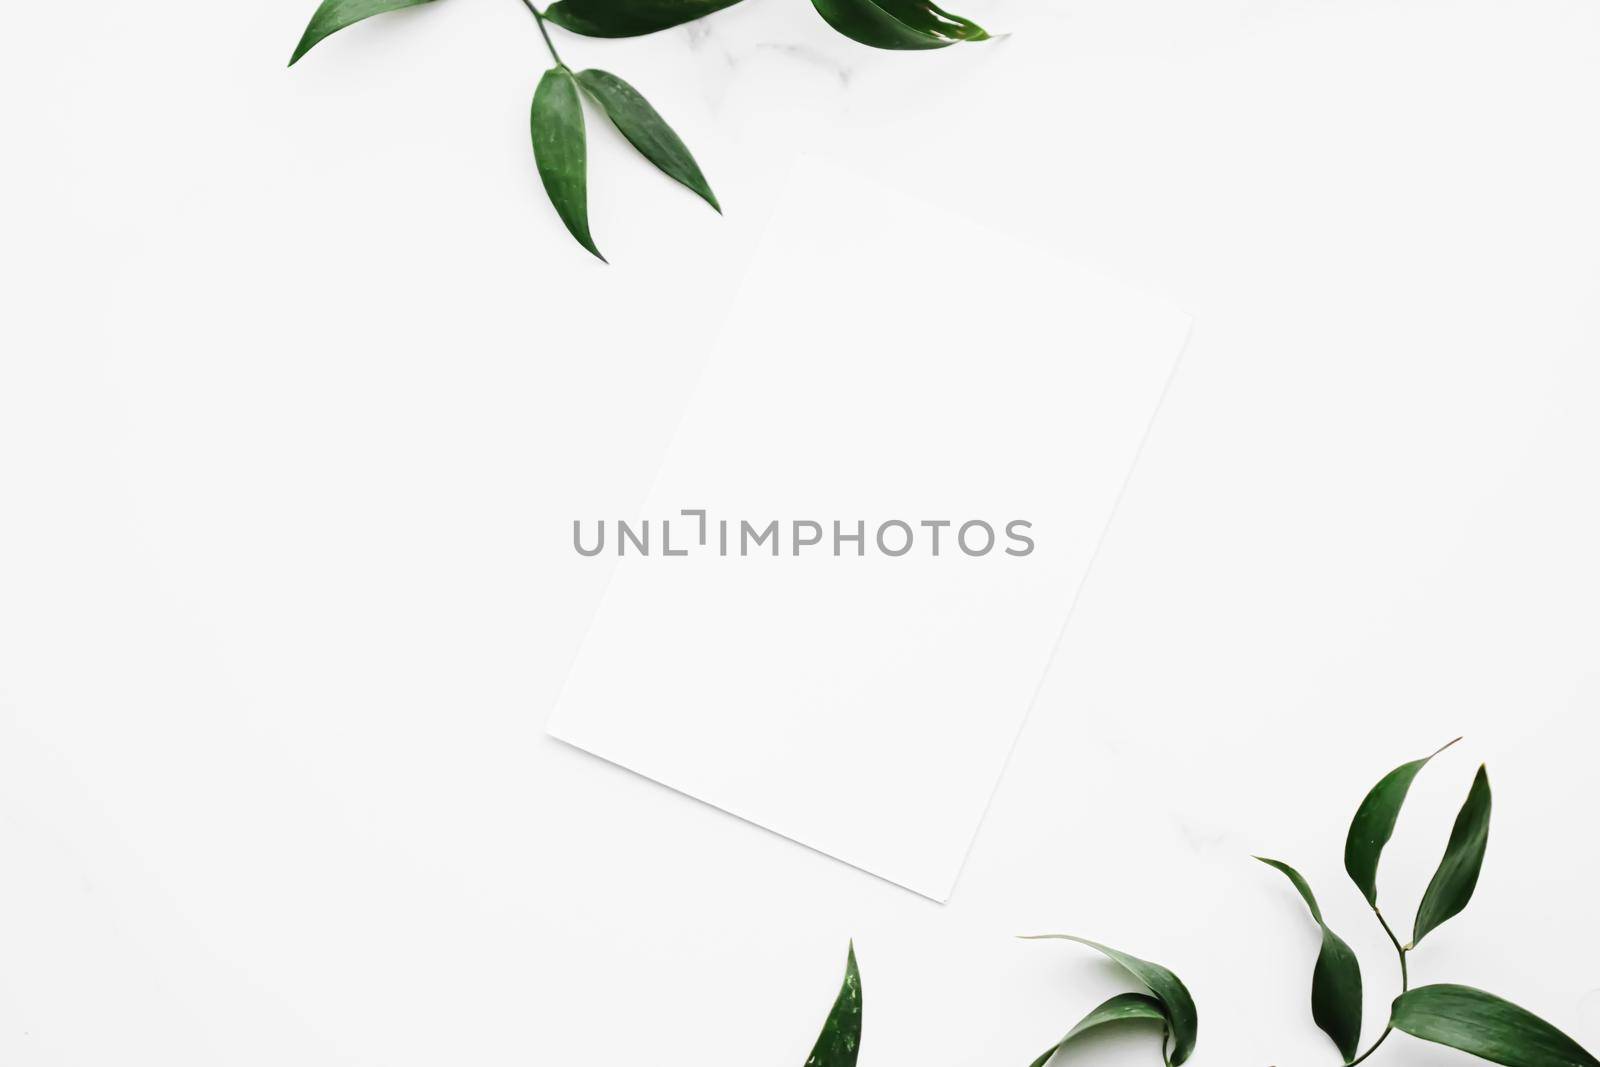 Blank white card, green leaves on white background as botanical frame flatlay, wedding invitation and holiday branding, flat lay design by Anneleven